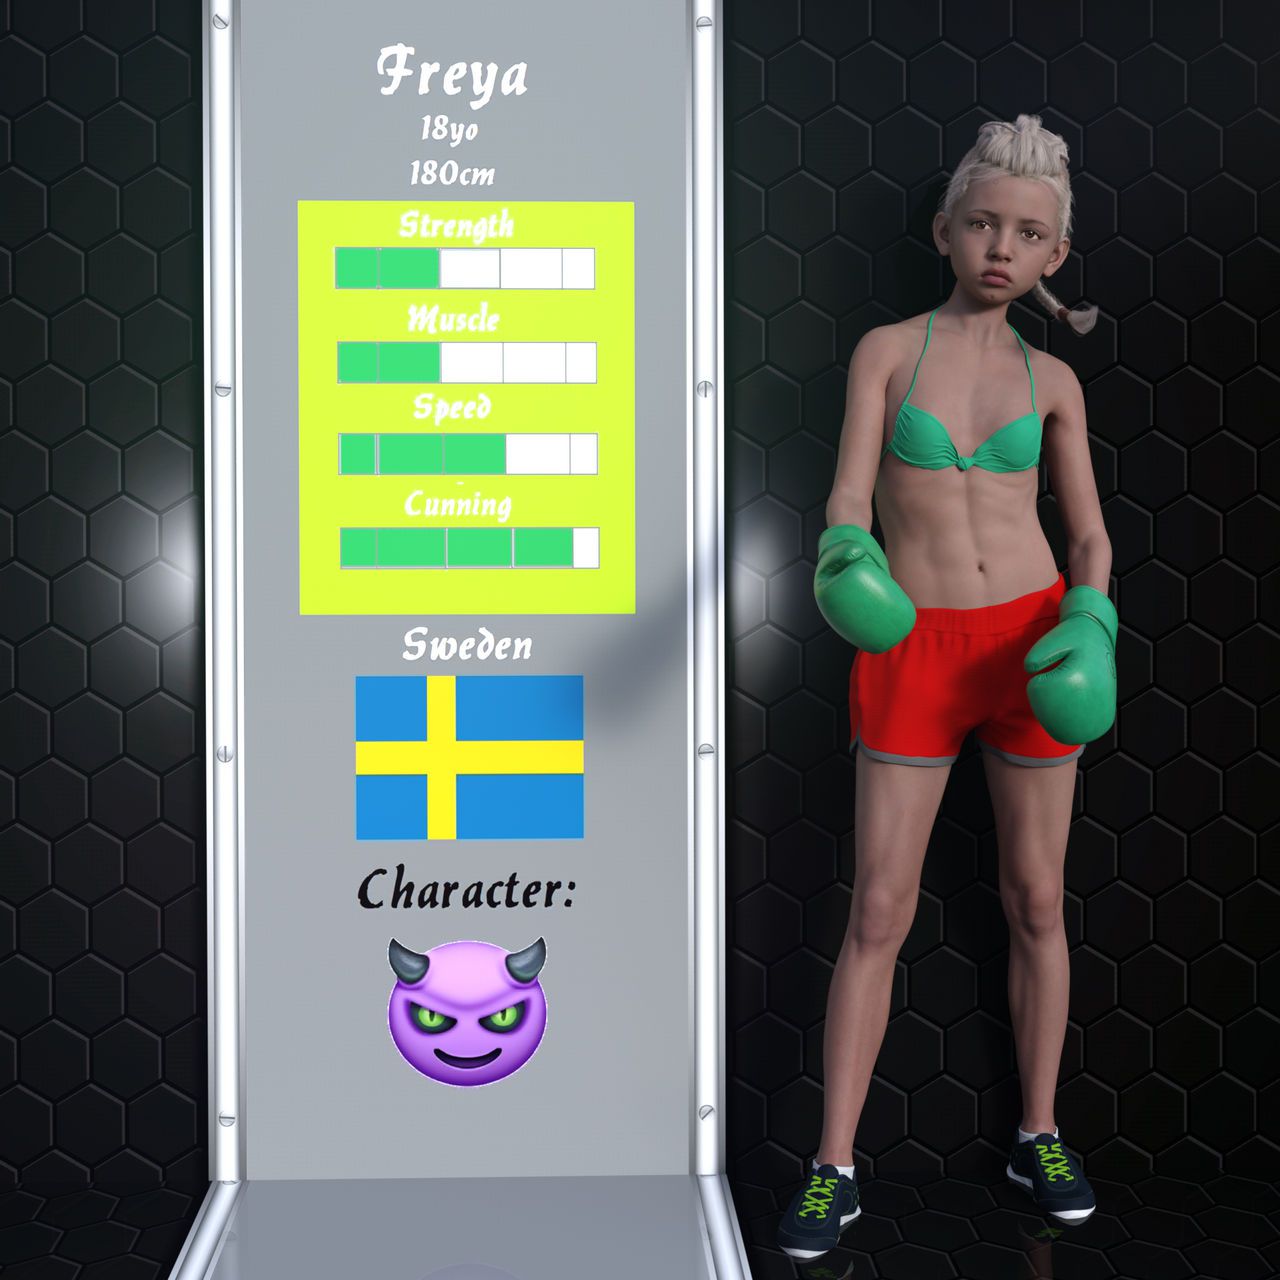 Underground girls boxing league / Roster 5